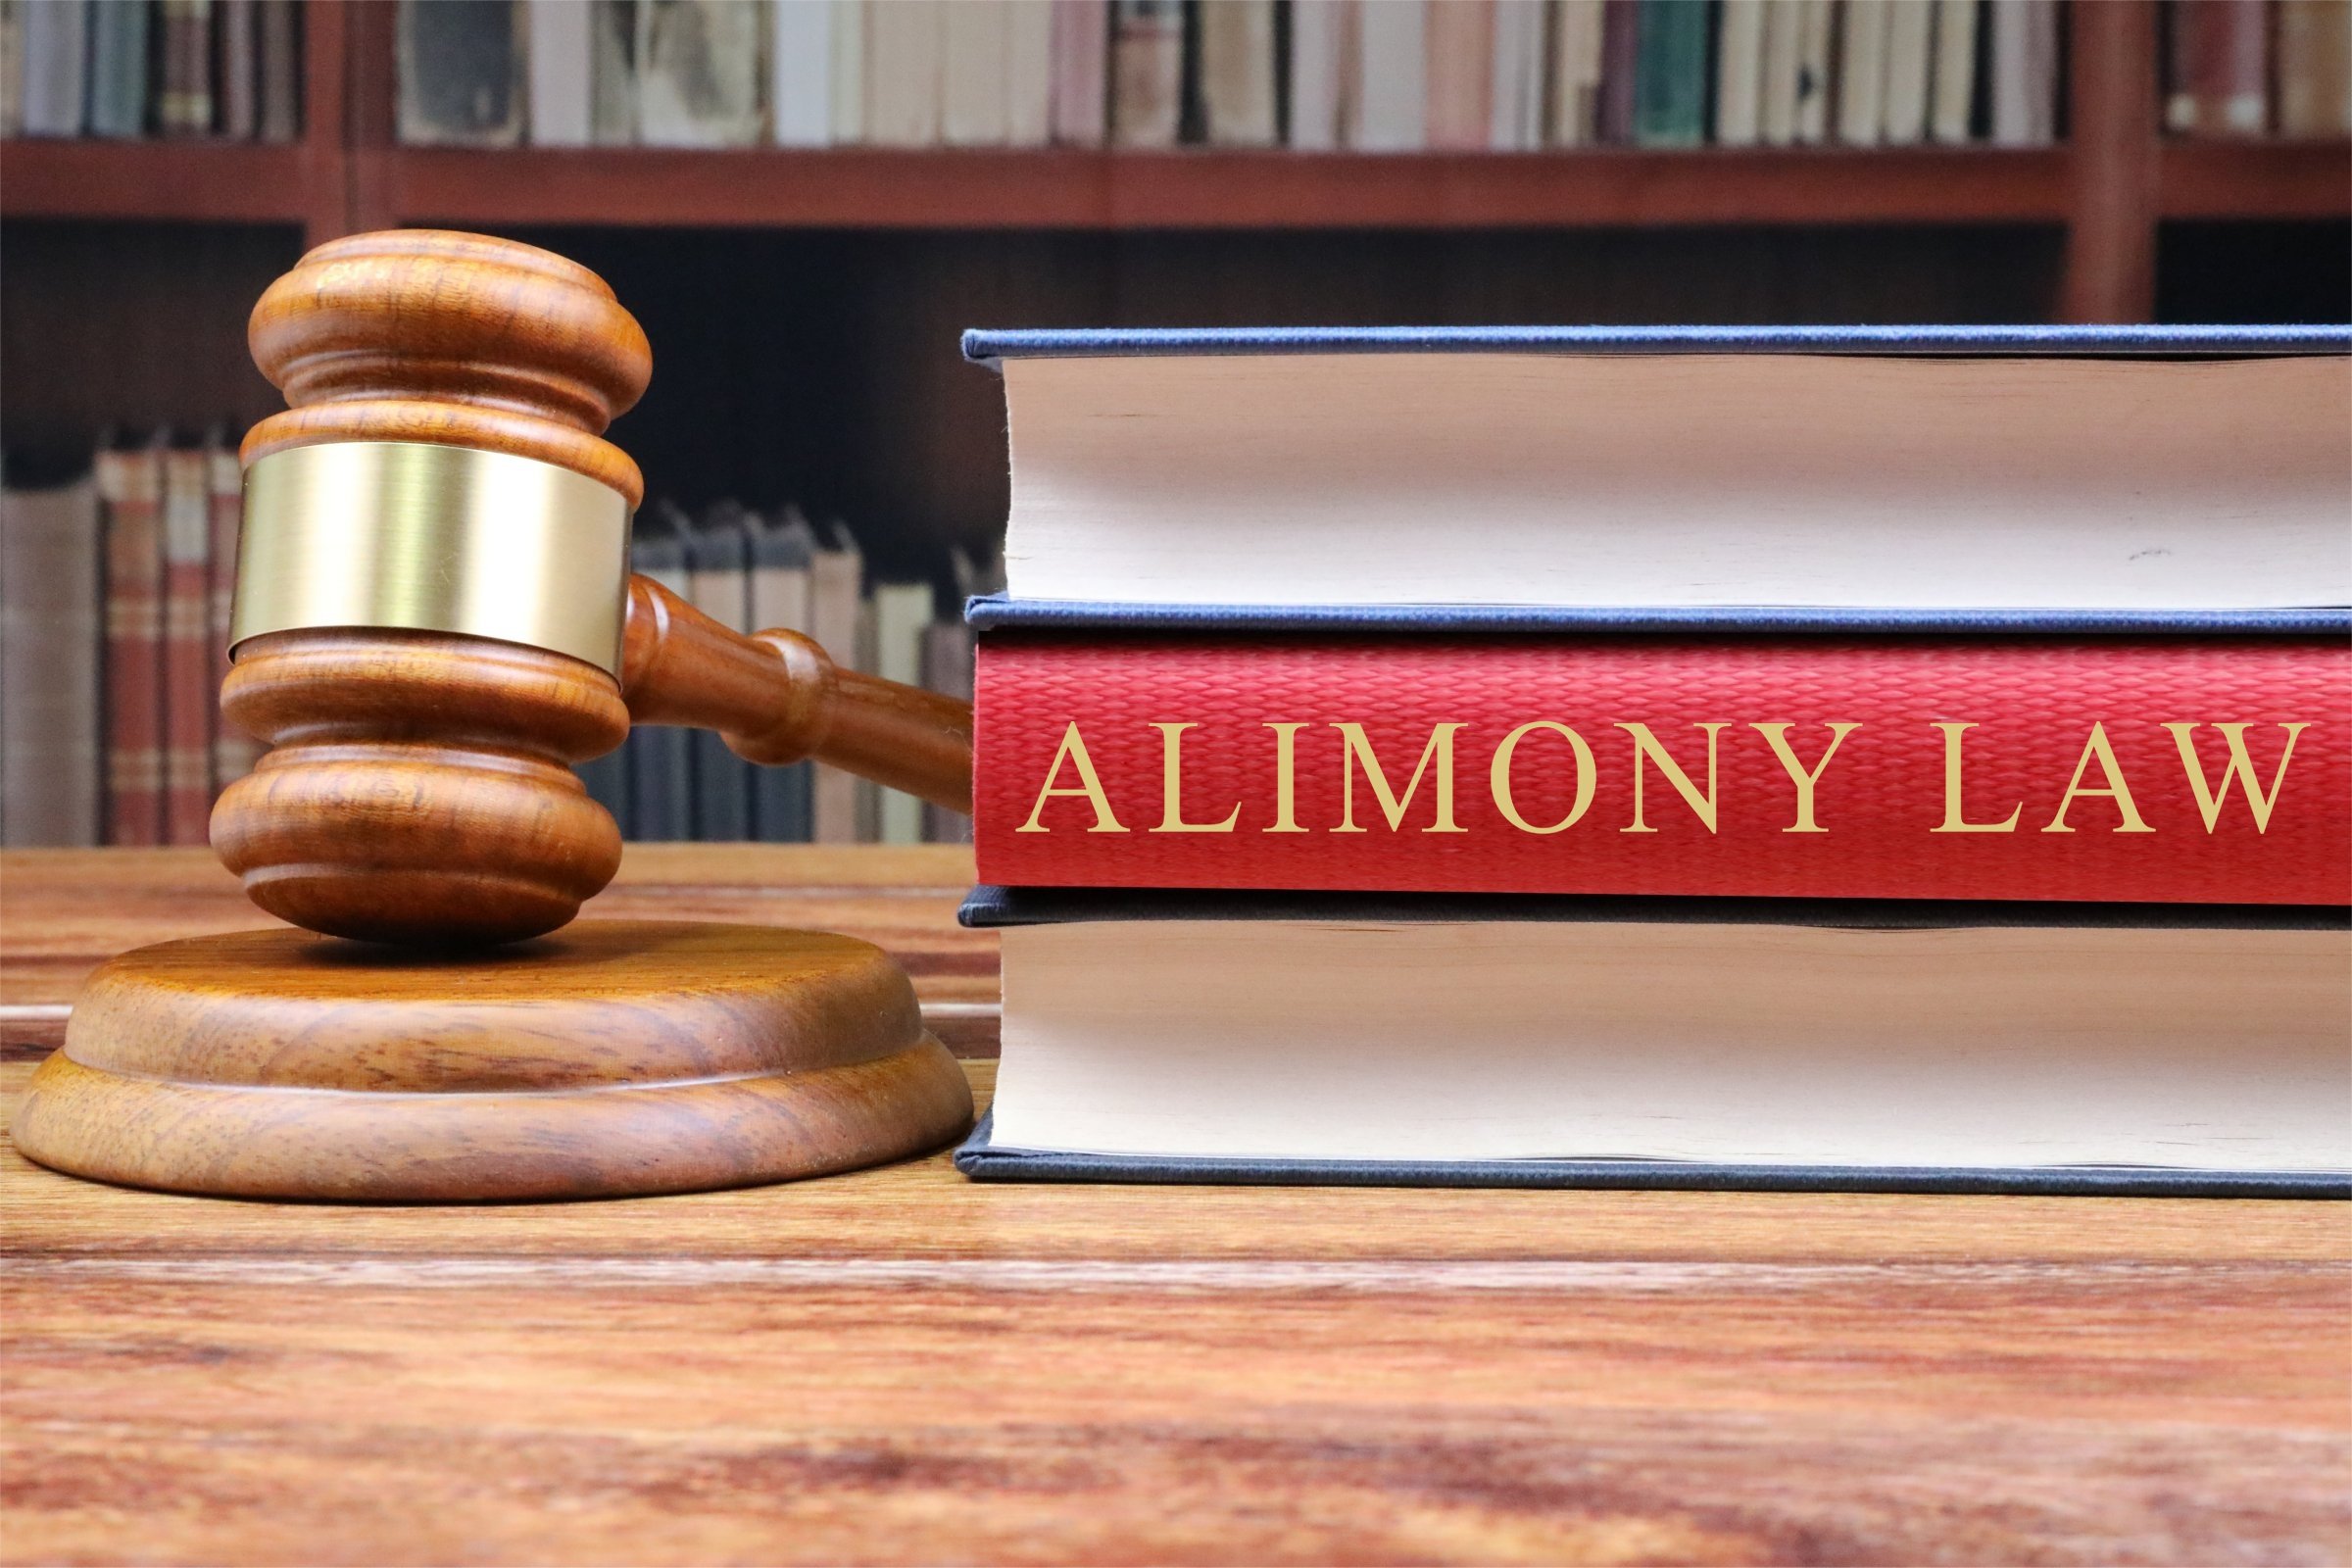 Free of Charge Creative Commons alimony law Image Legal 8